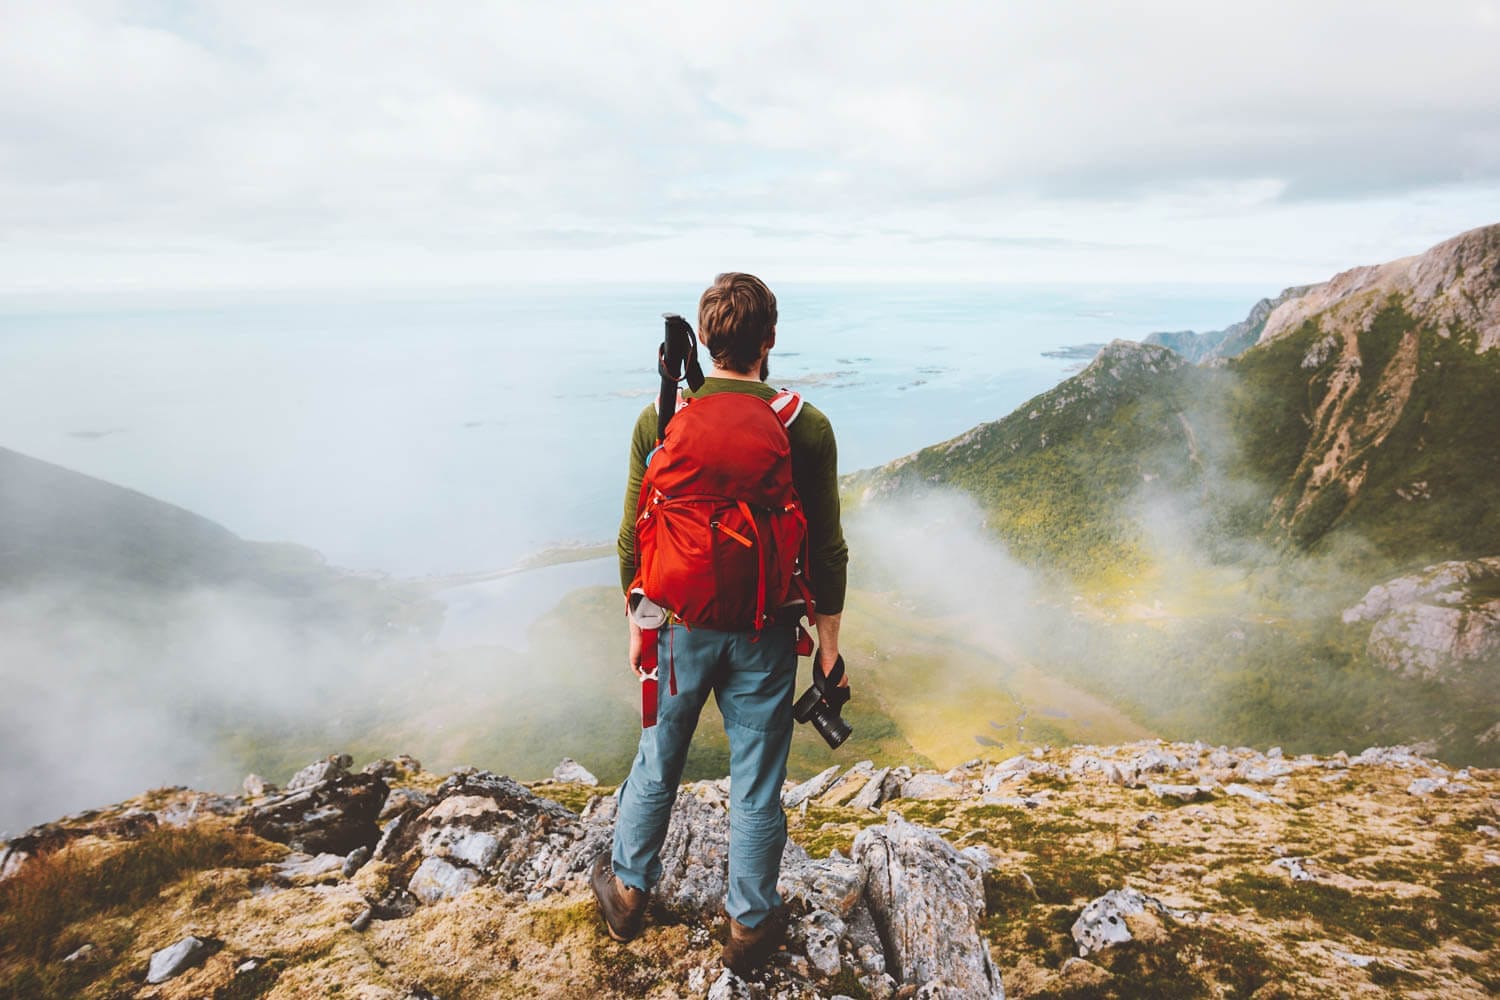 A hiker with a red backpack standing atop a mountain overlooking a misty coastline.